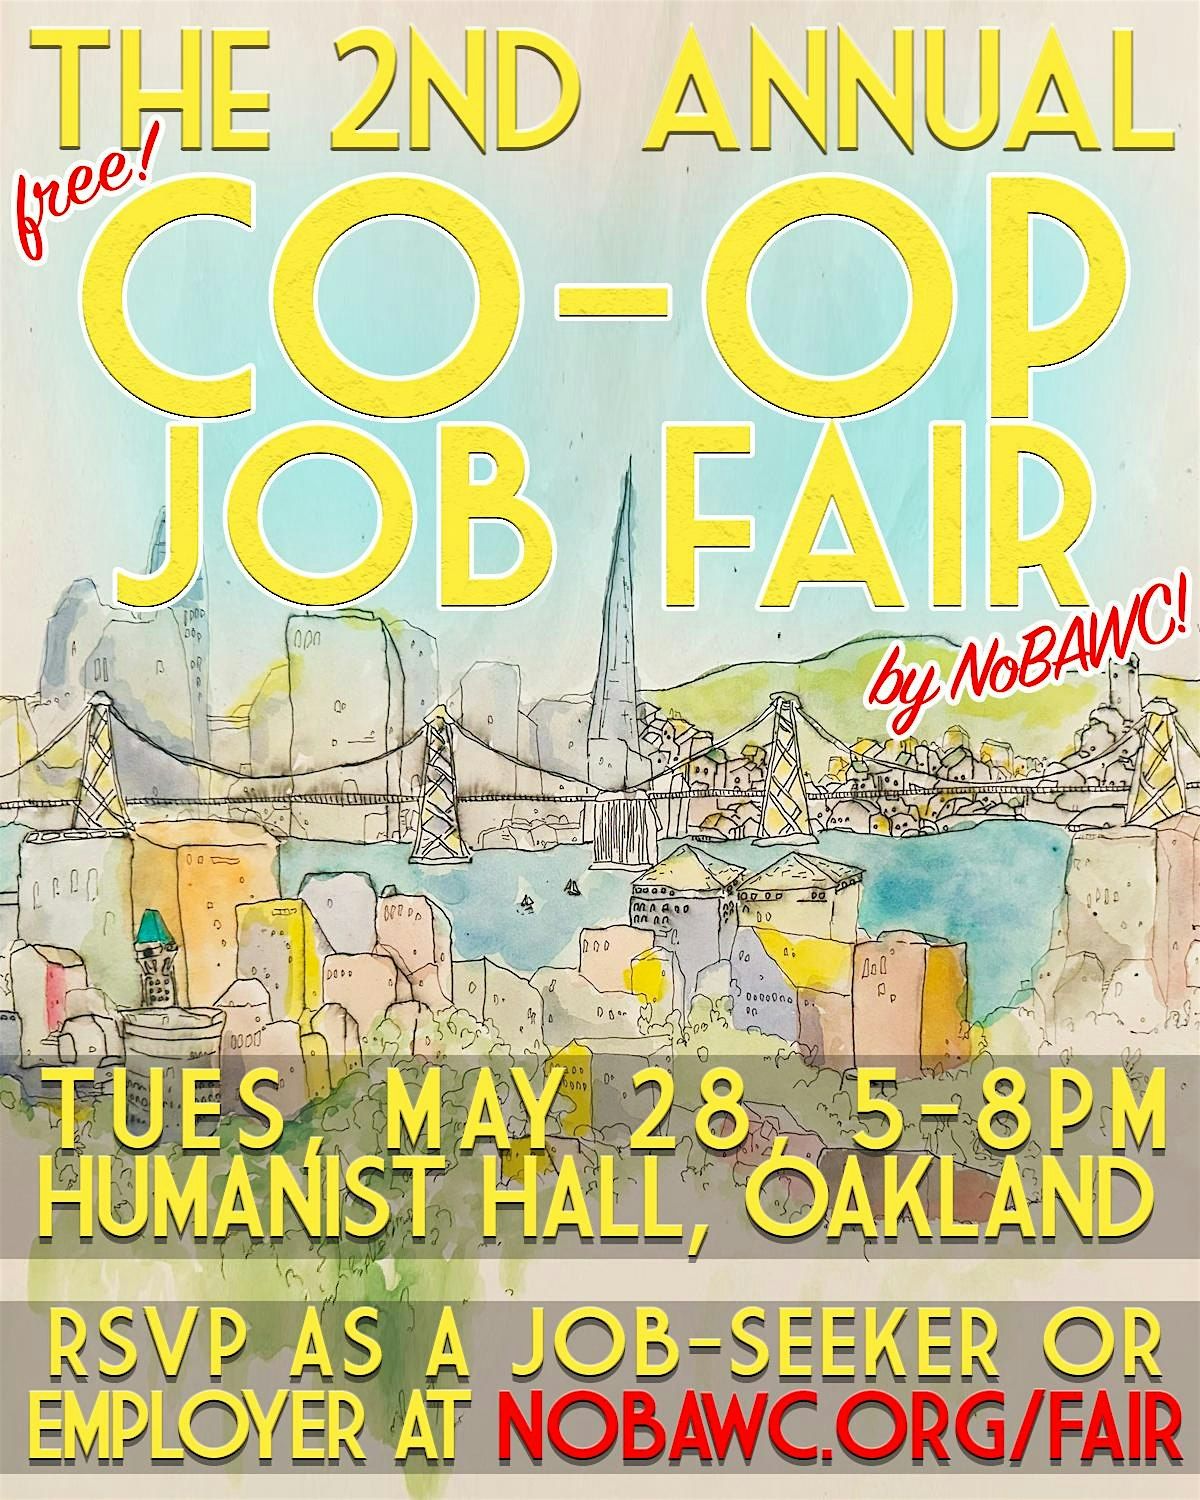 2nd Annual Co-op Job Fair -  Bay Area by NoBAWC